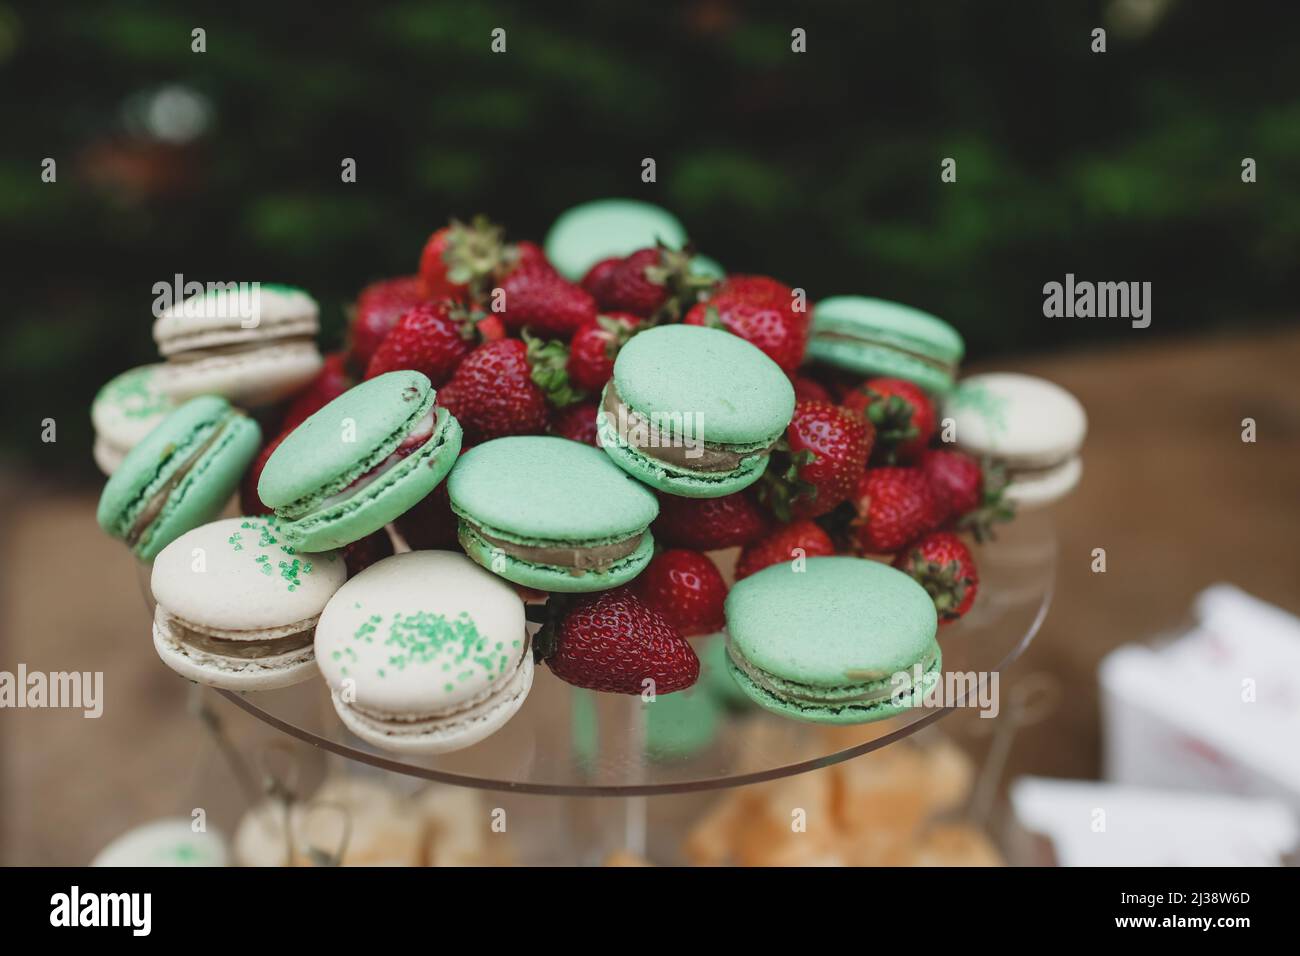 Colored sweet macarons cakes at an event. Stock Photo